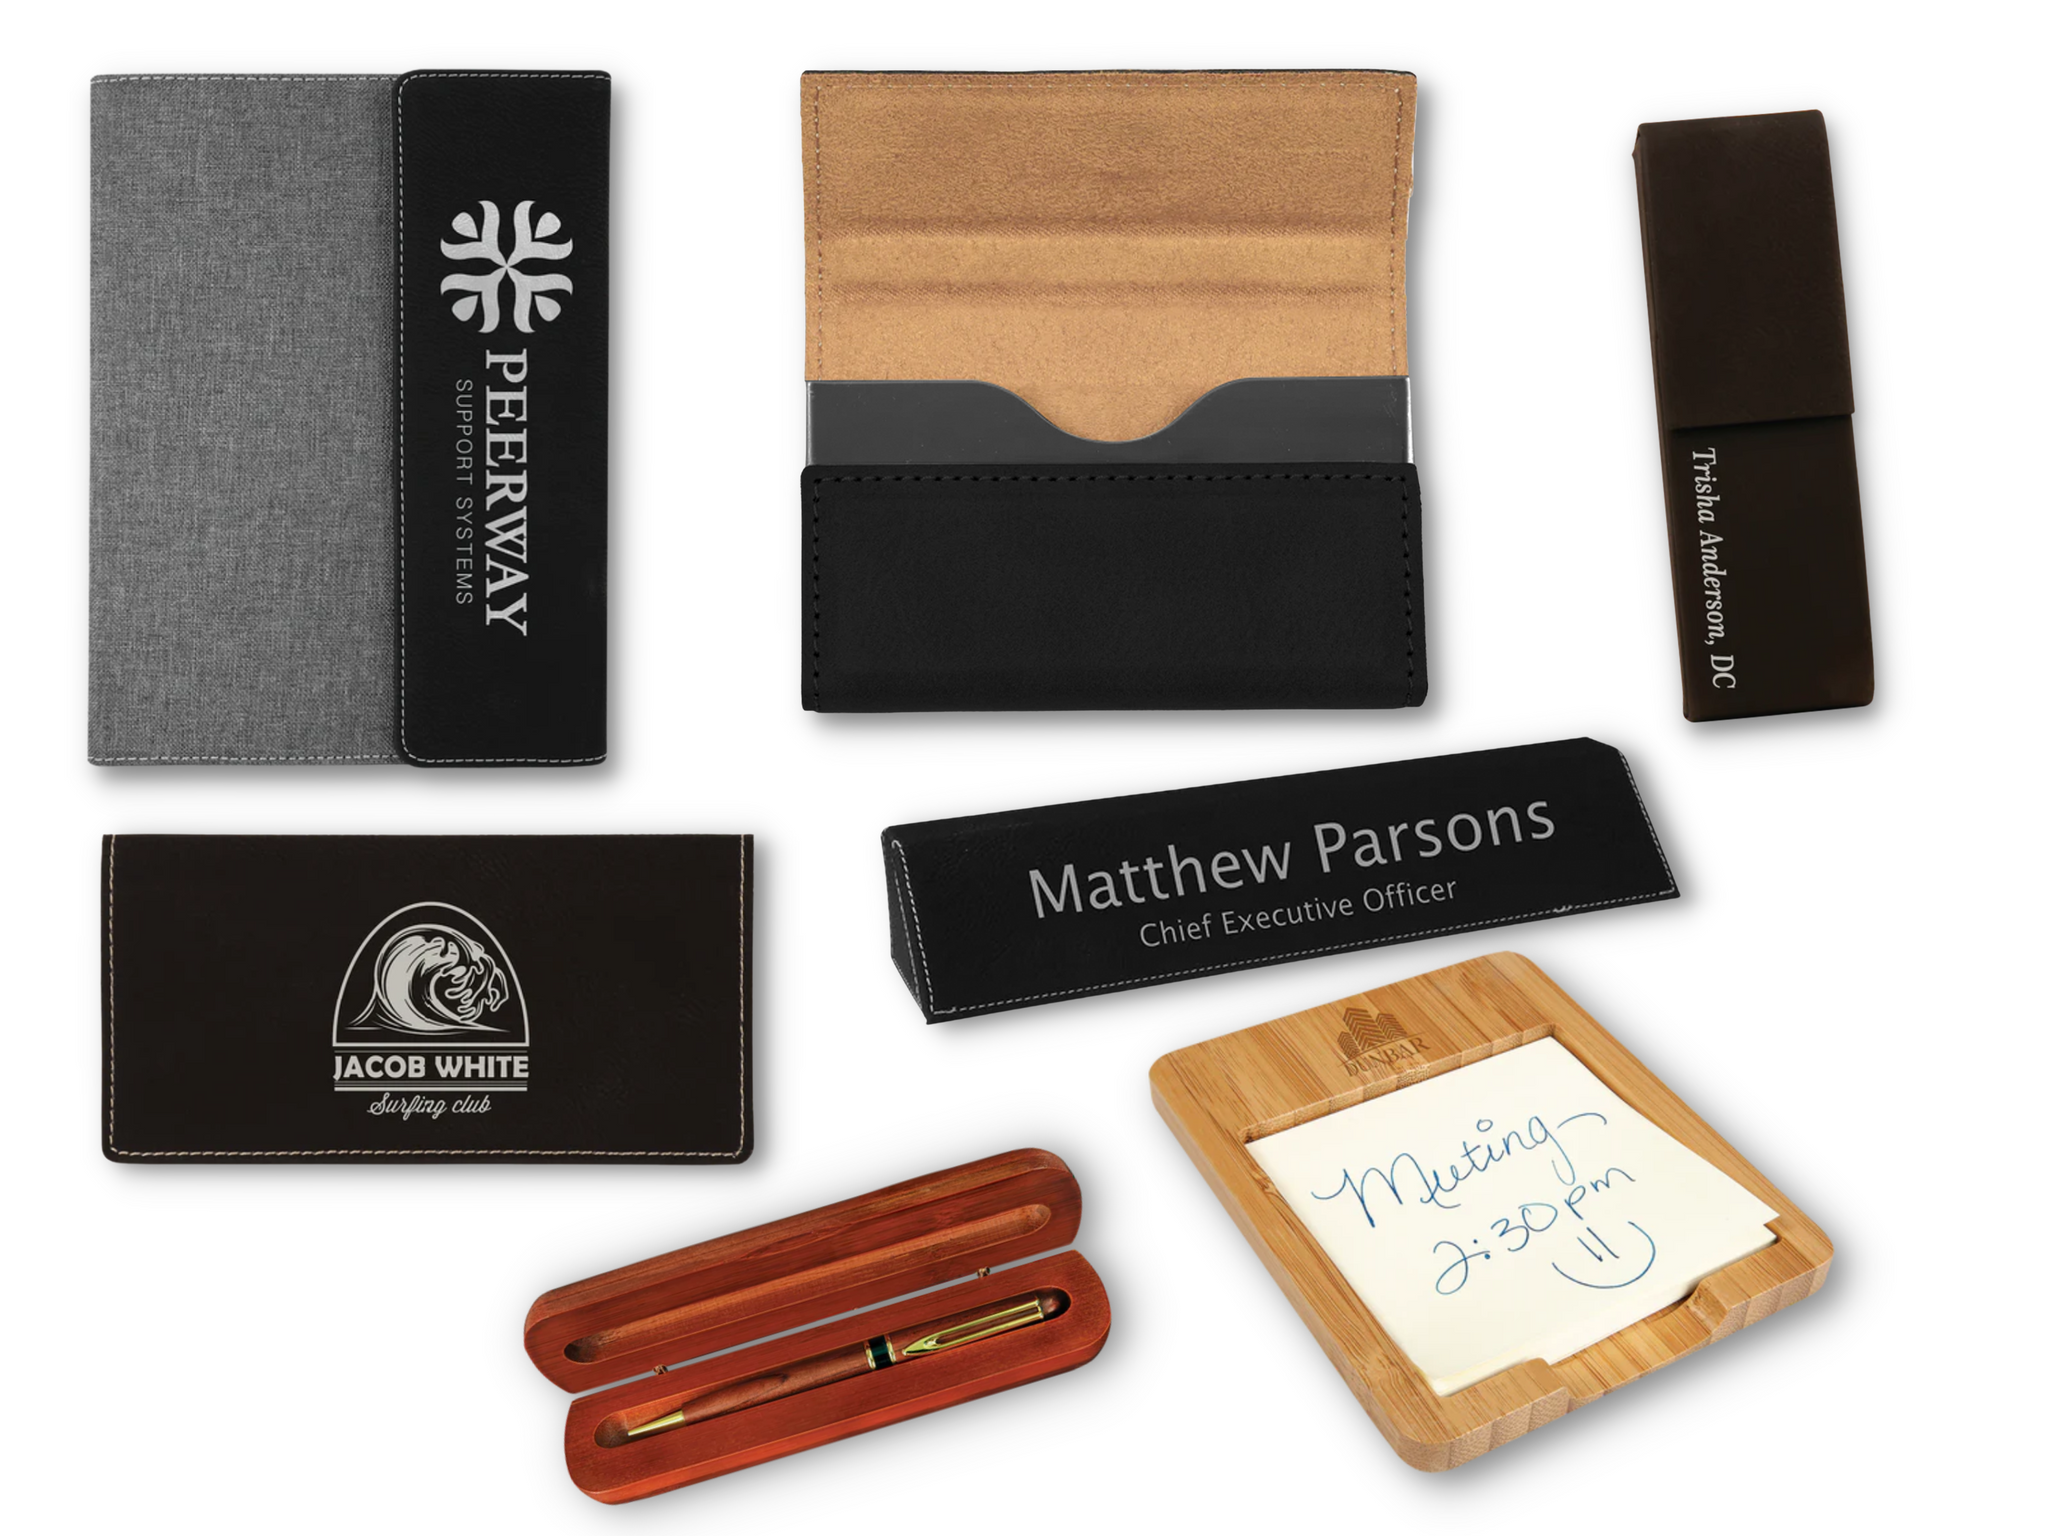 ULTIMATE BUSINESS GIFT SET - PORTFOLIO + PEN CASE + BUSINESS CARD CASES +CHECK BOOK COVERS + DESK NAME WIDGETS + STICKY NOTE HOLDER